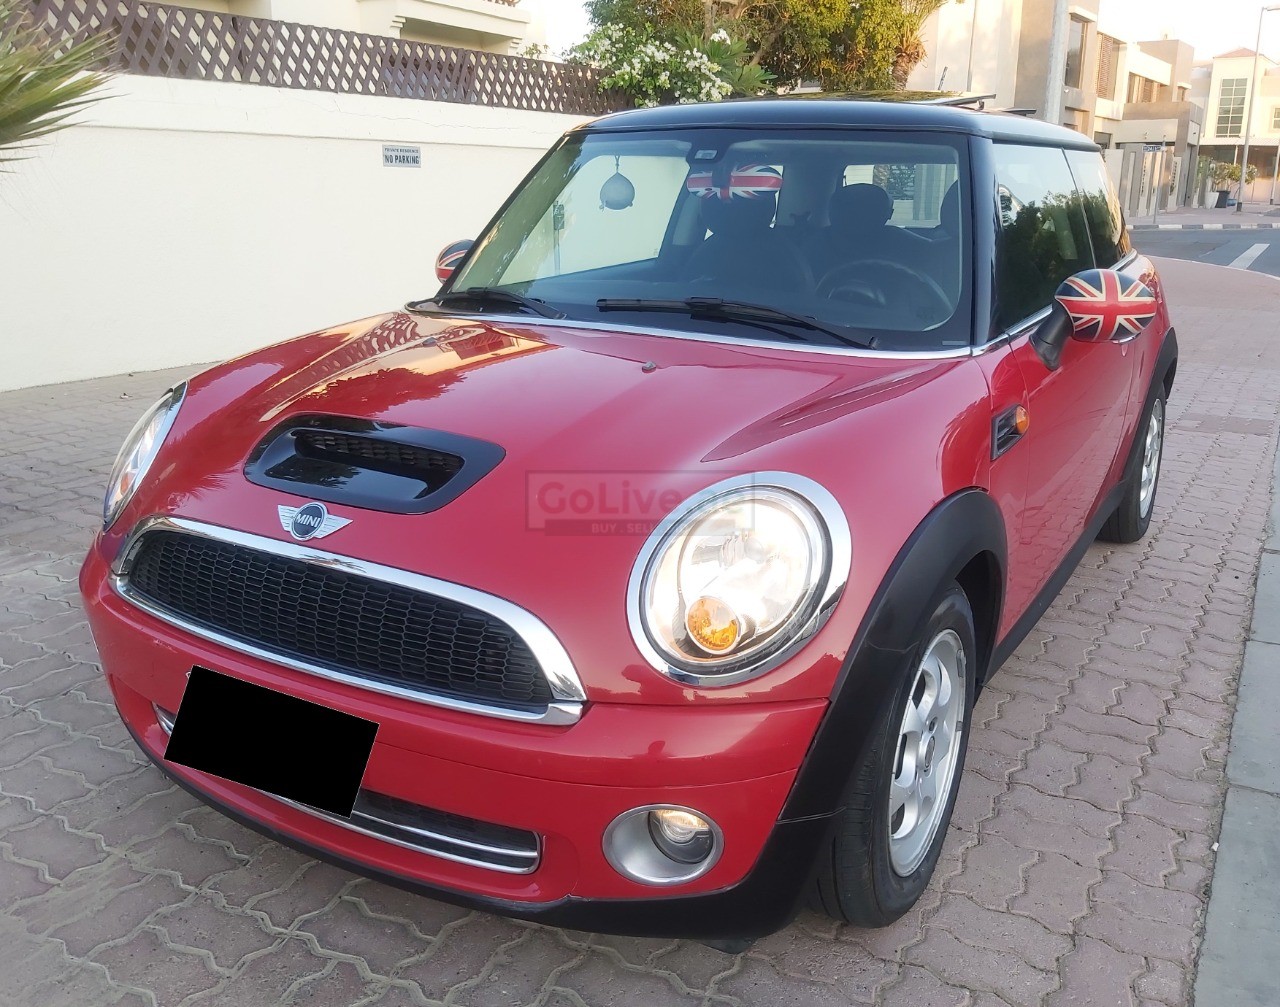 MINI COOPER 2013,PANORAMIC,AUTOMATIC,44000MILES ONLY,FRESH IMPORT